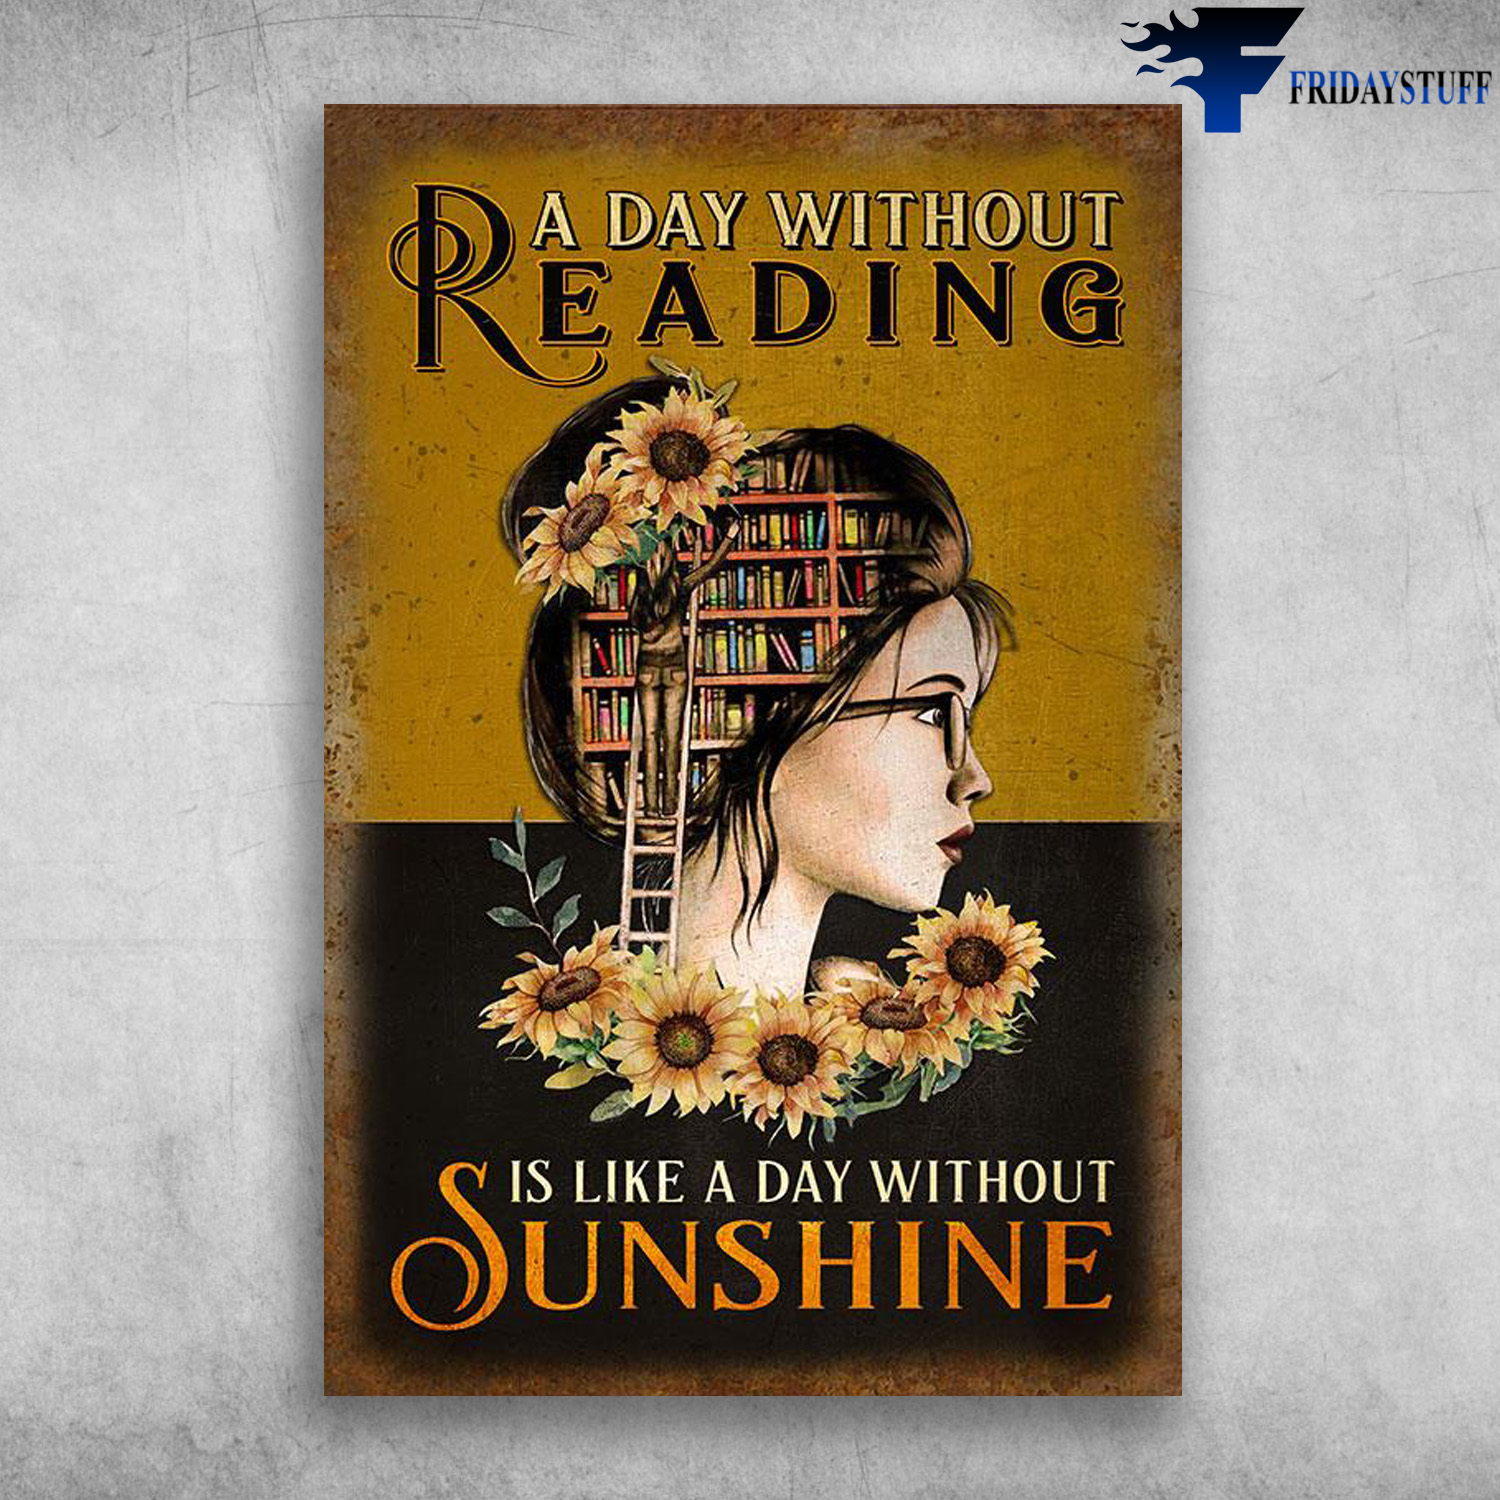 The Girl Loves Books - A Day Without Reading, Is Like A Day Without Sunshine